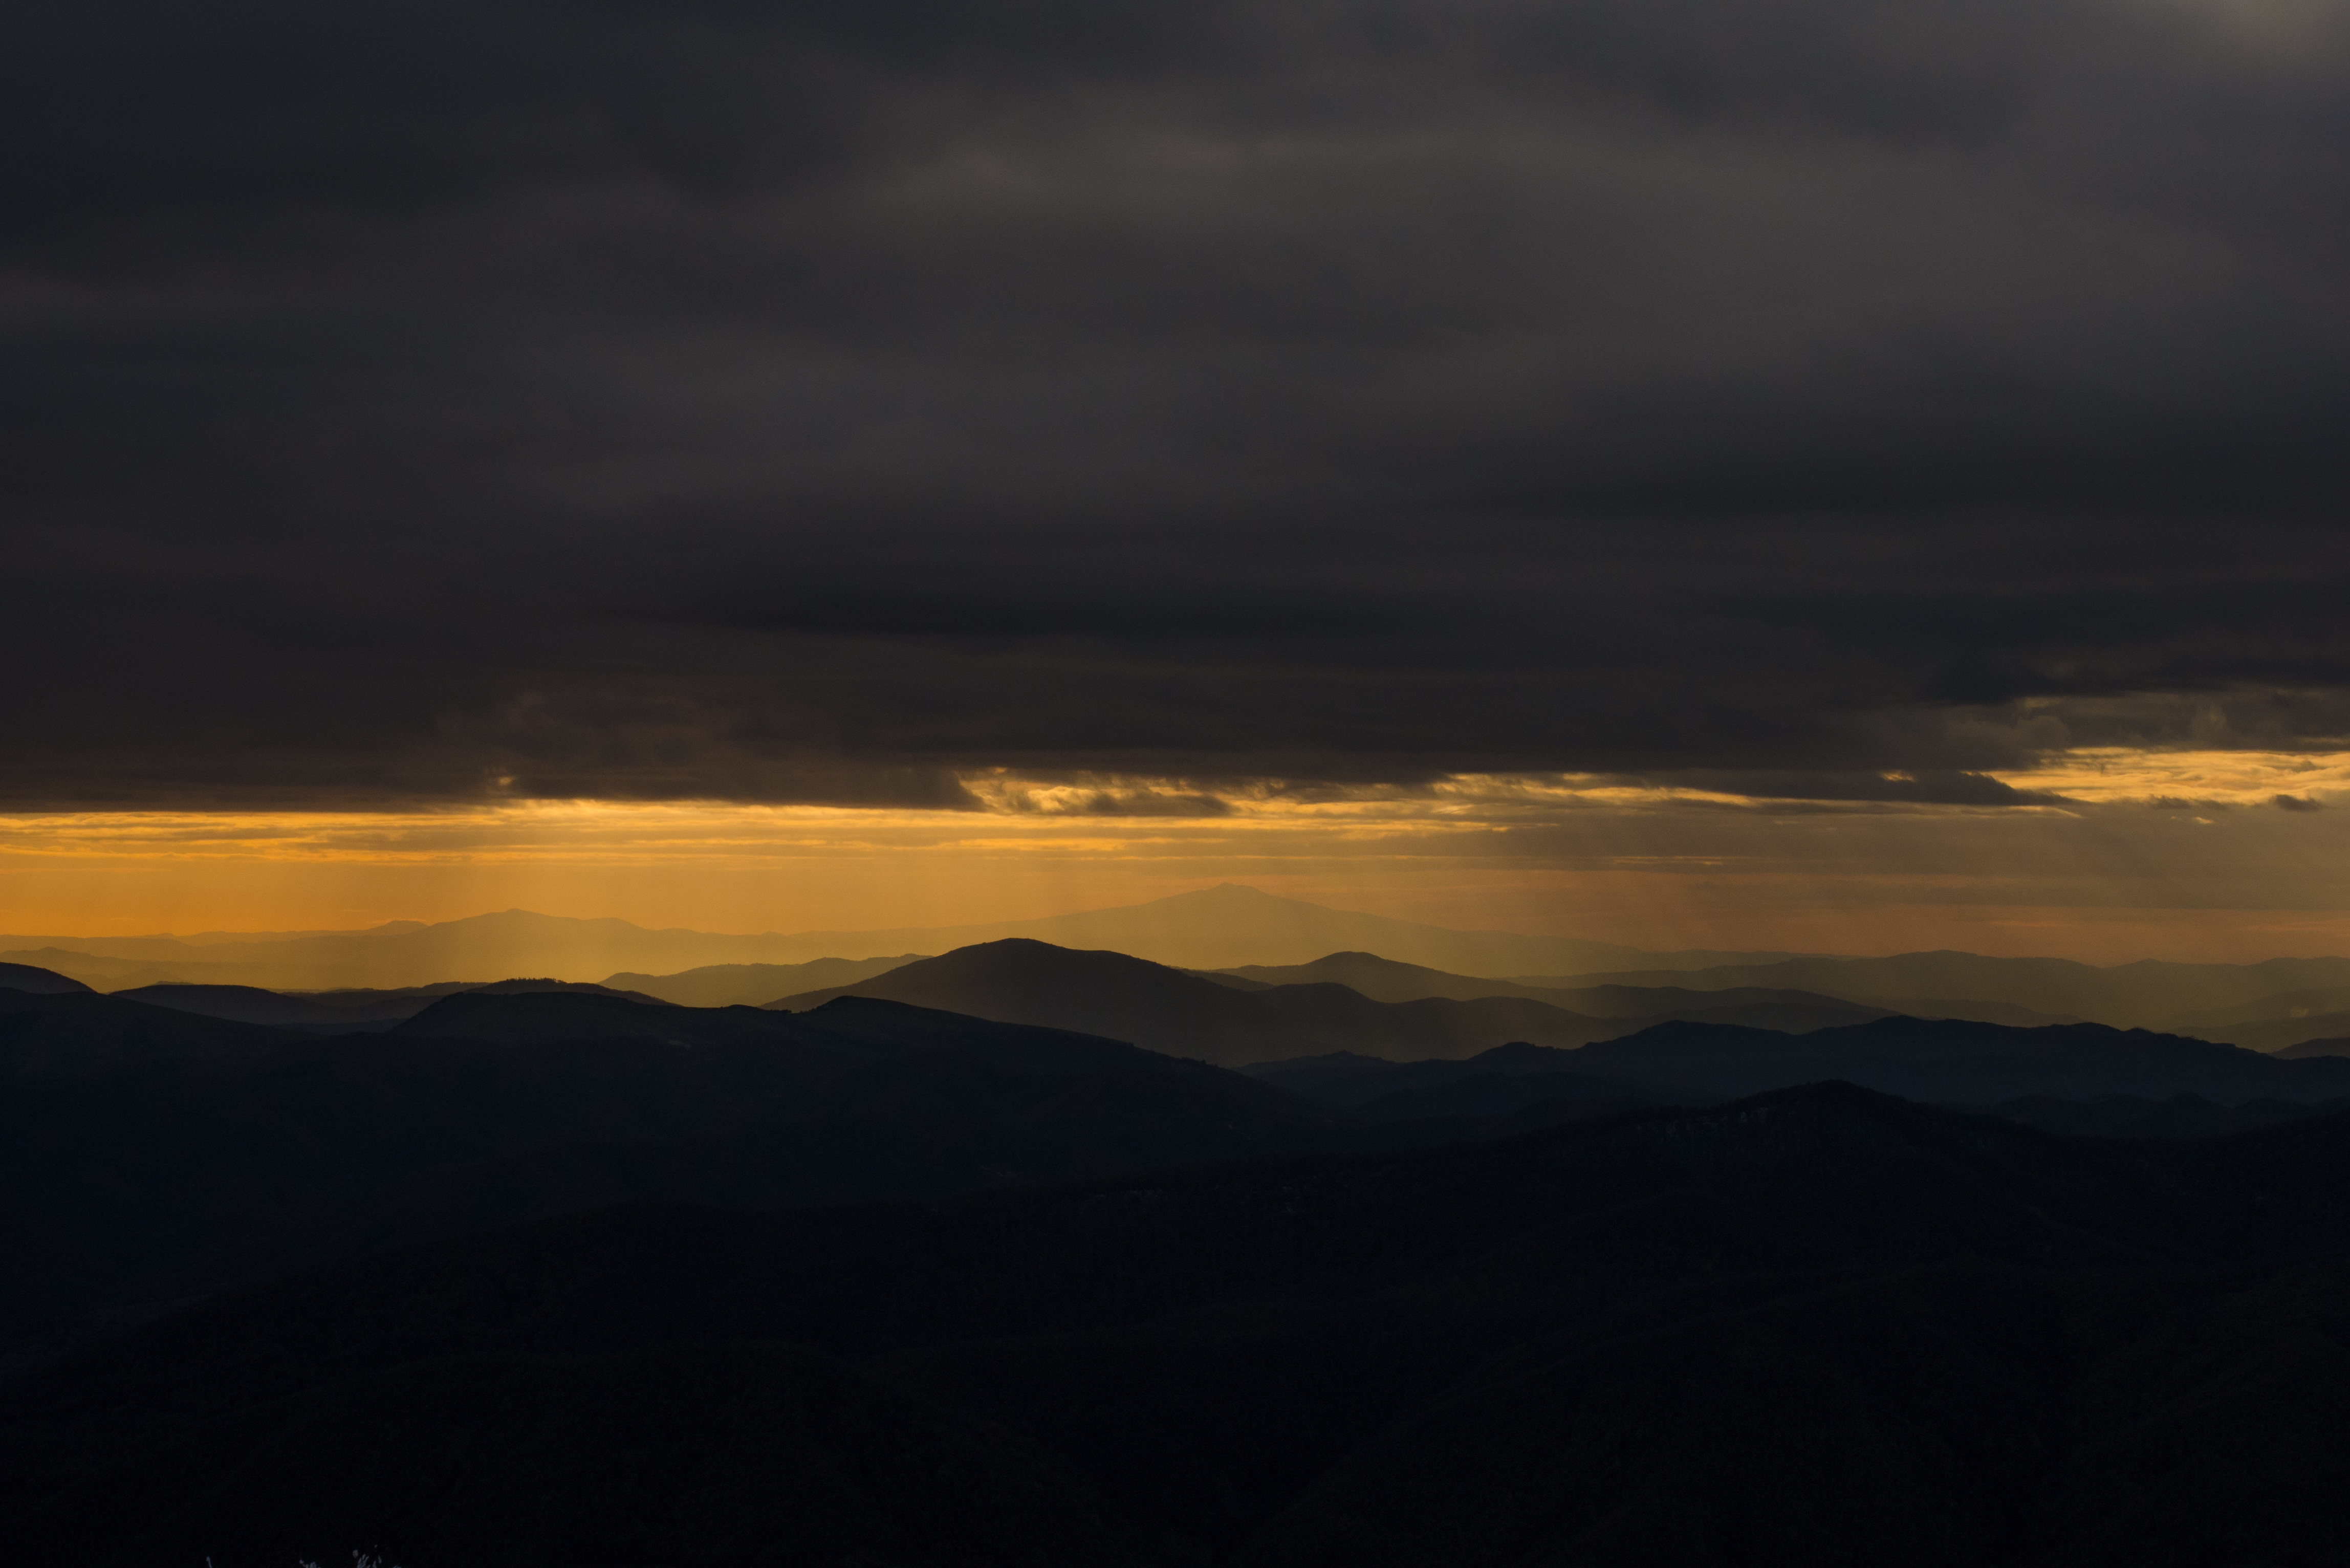 dark, mainly cloudy, nature, mountains, night, clouds, horizon, overcast